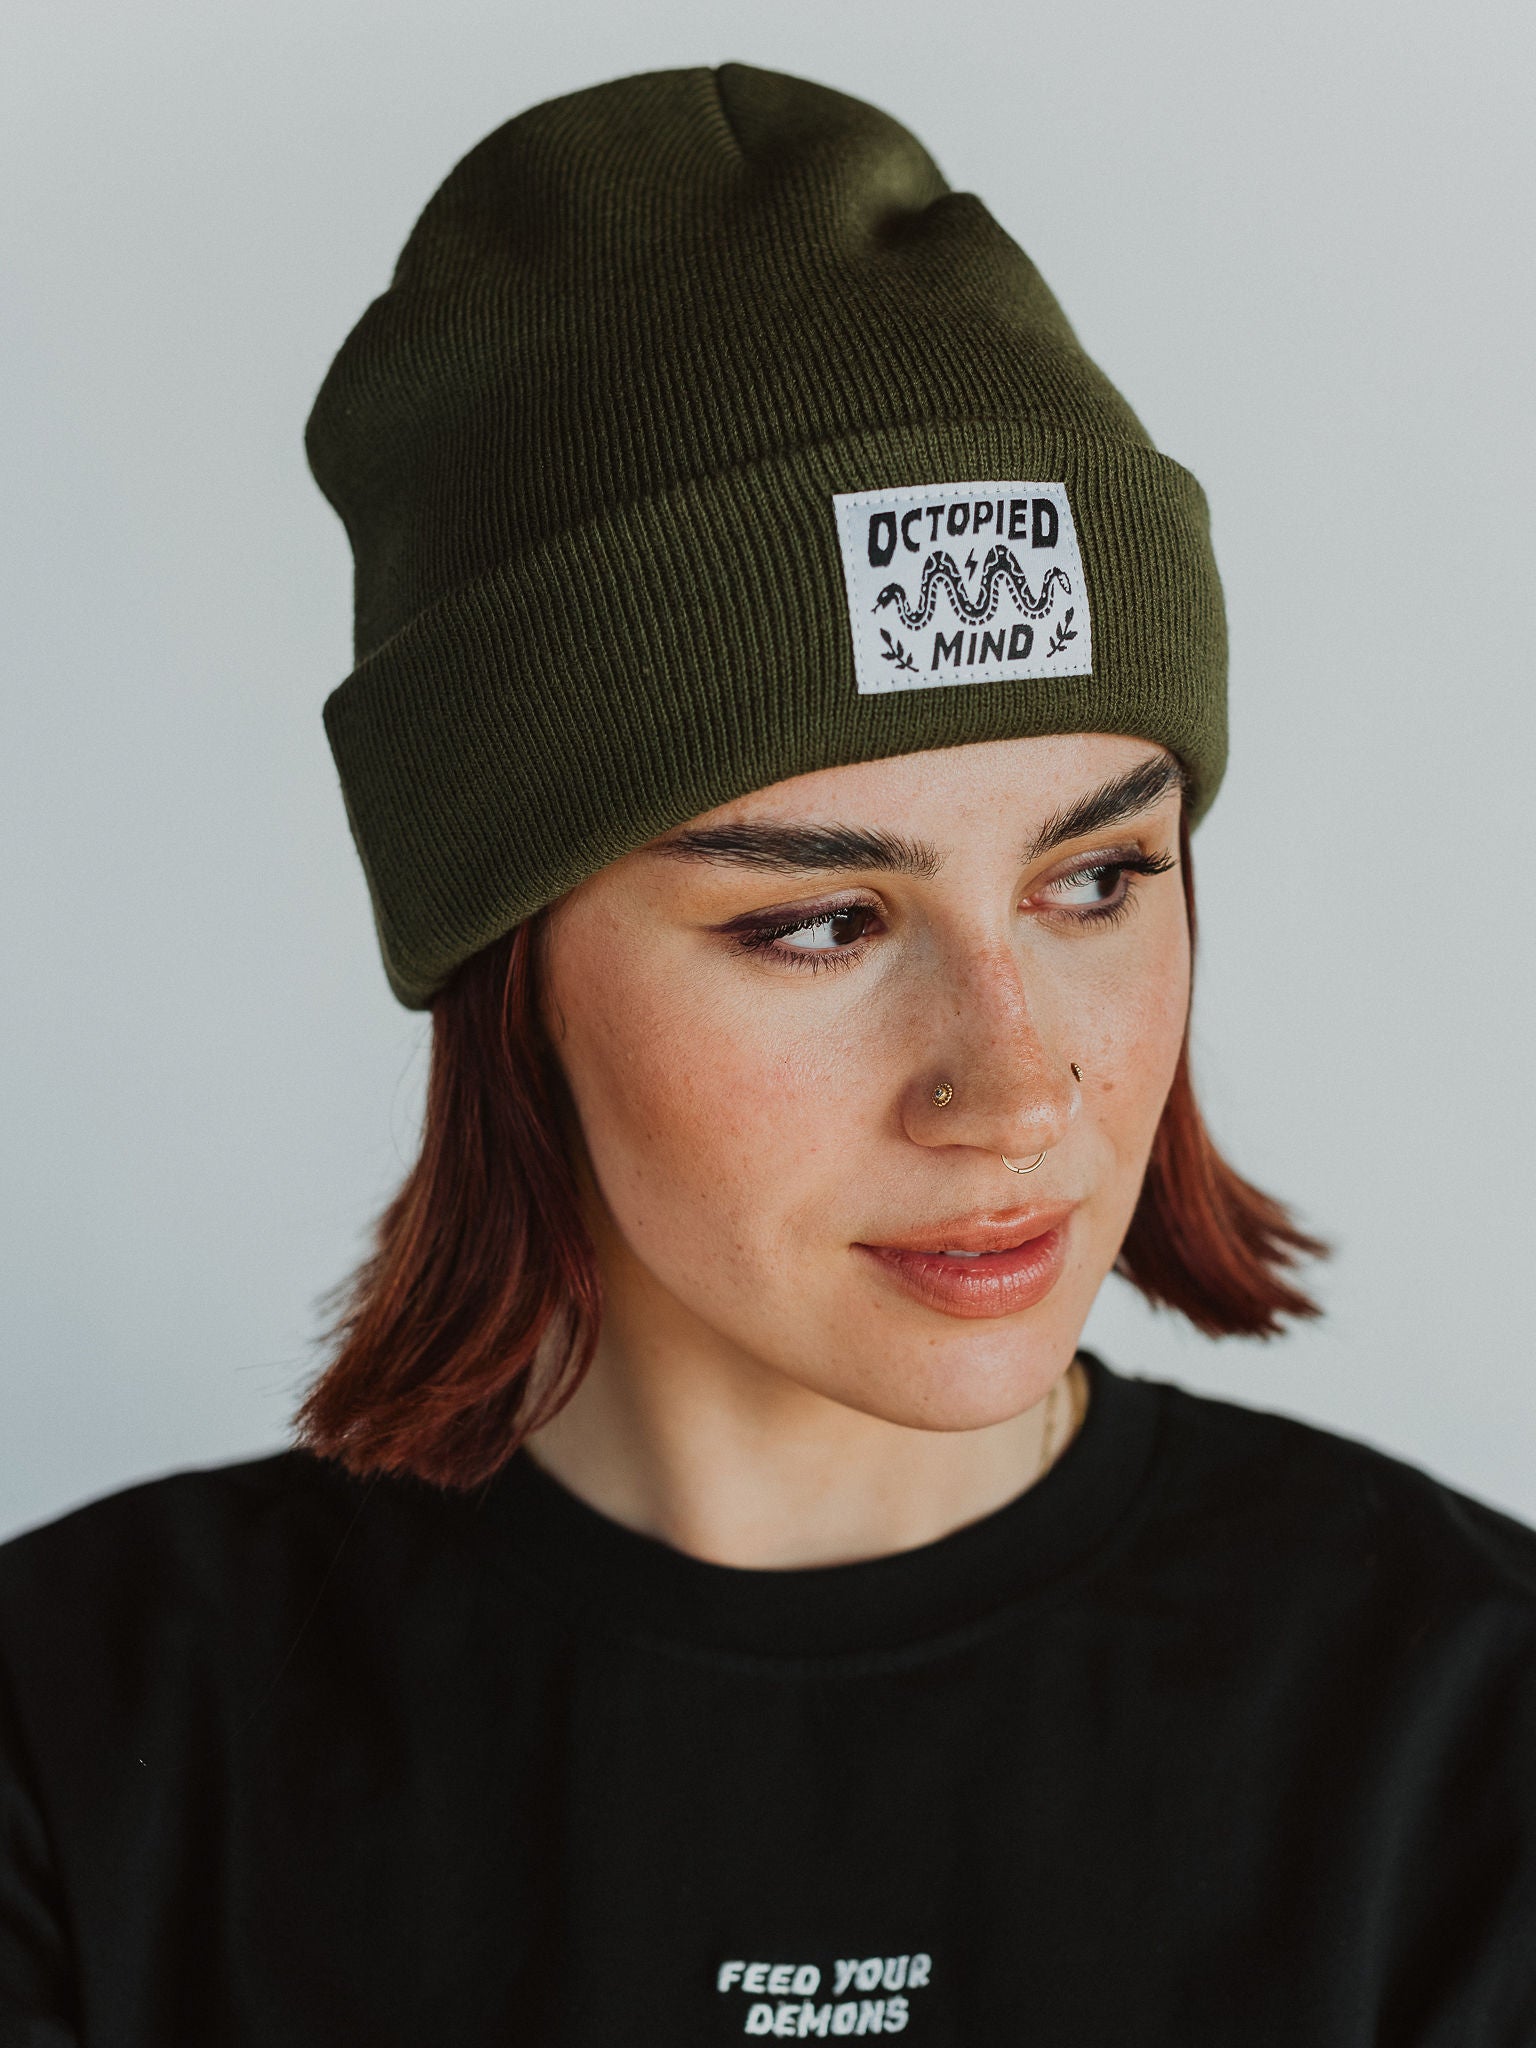 Moss Classic Knit Beanie - Octopied Mind